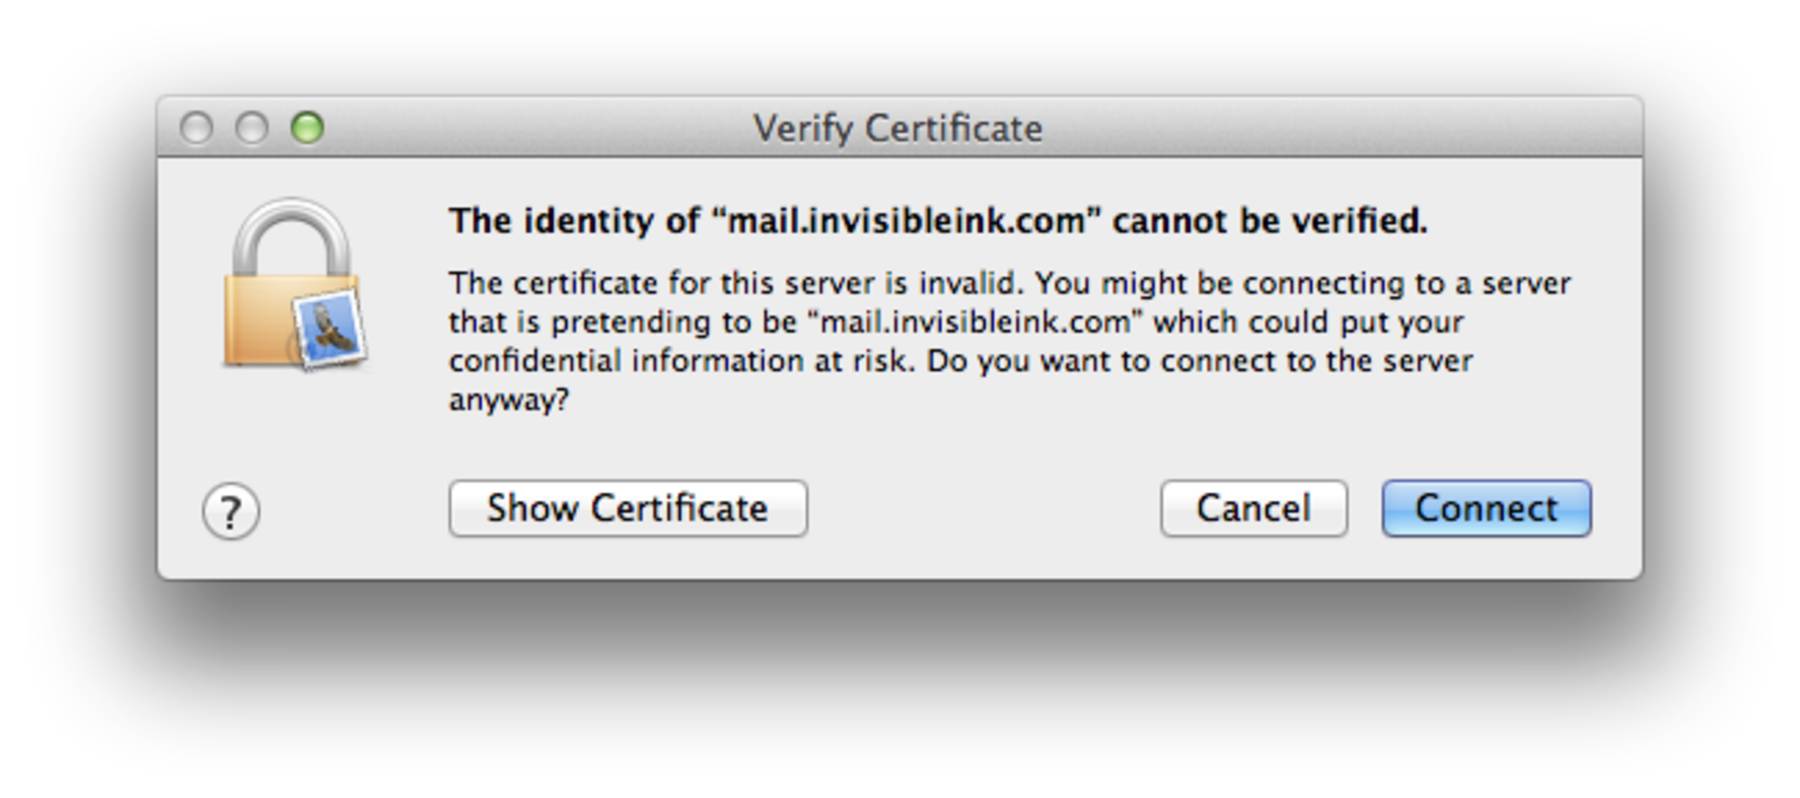 Step 4 » You will receive a warning message asking you to Verify Your Certificate for mail.yourdomain.com. Click CANCEL.